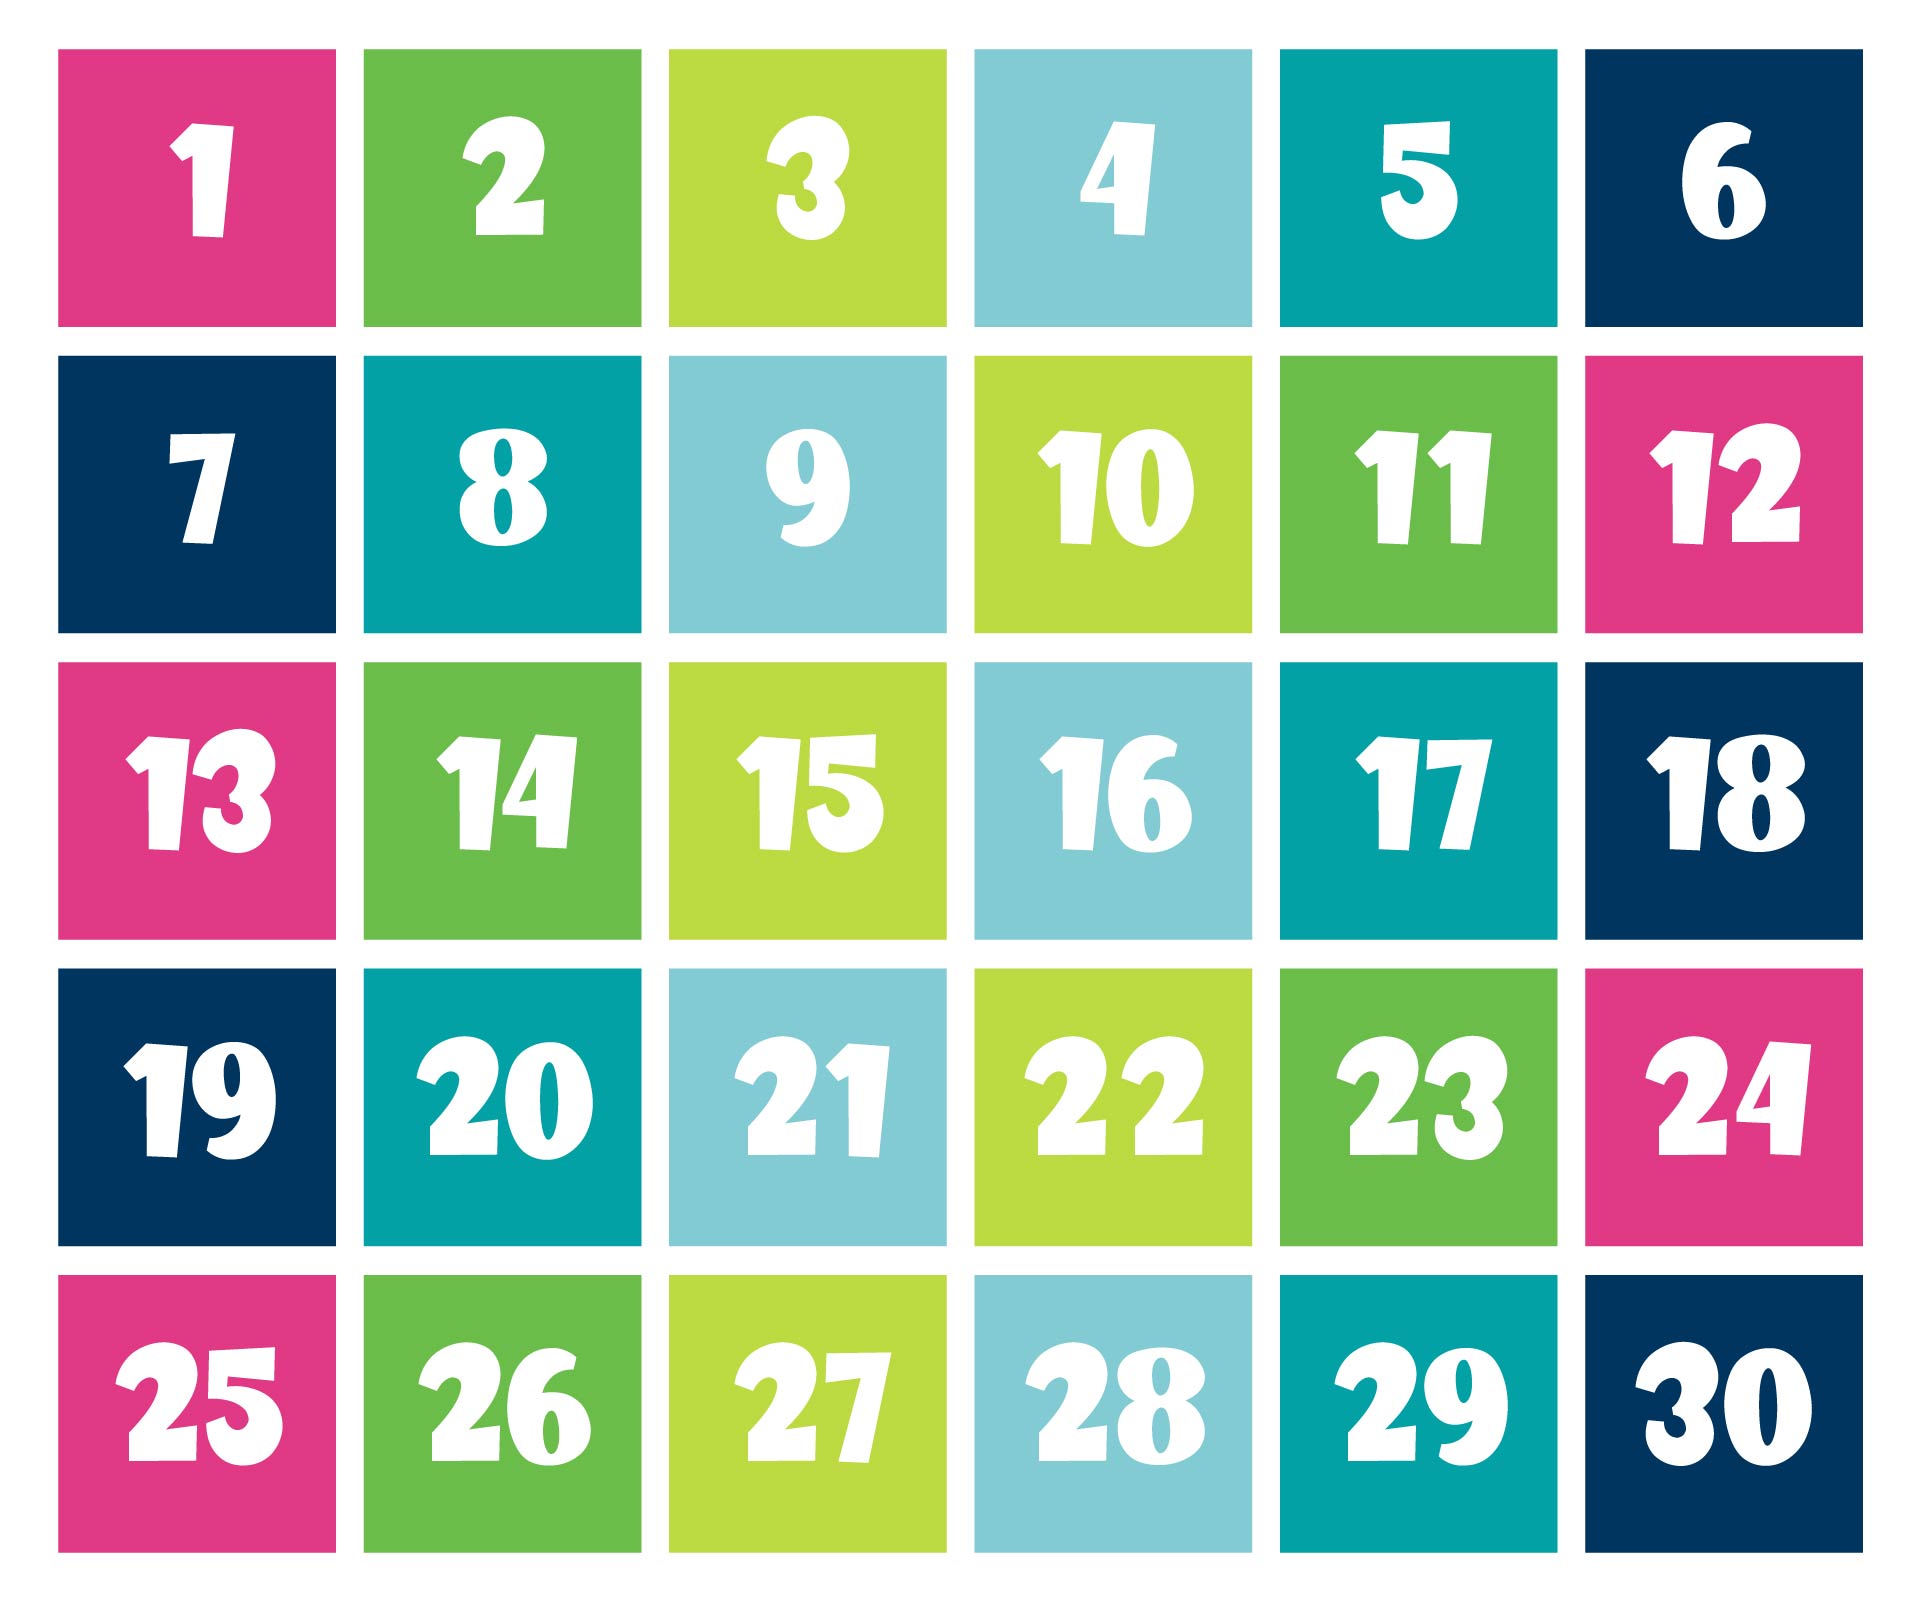 7 Best Images of Printable Number Chart 1 30 - Number Chart 1 20